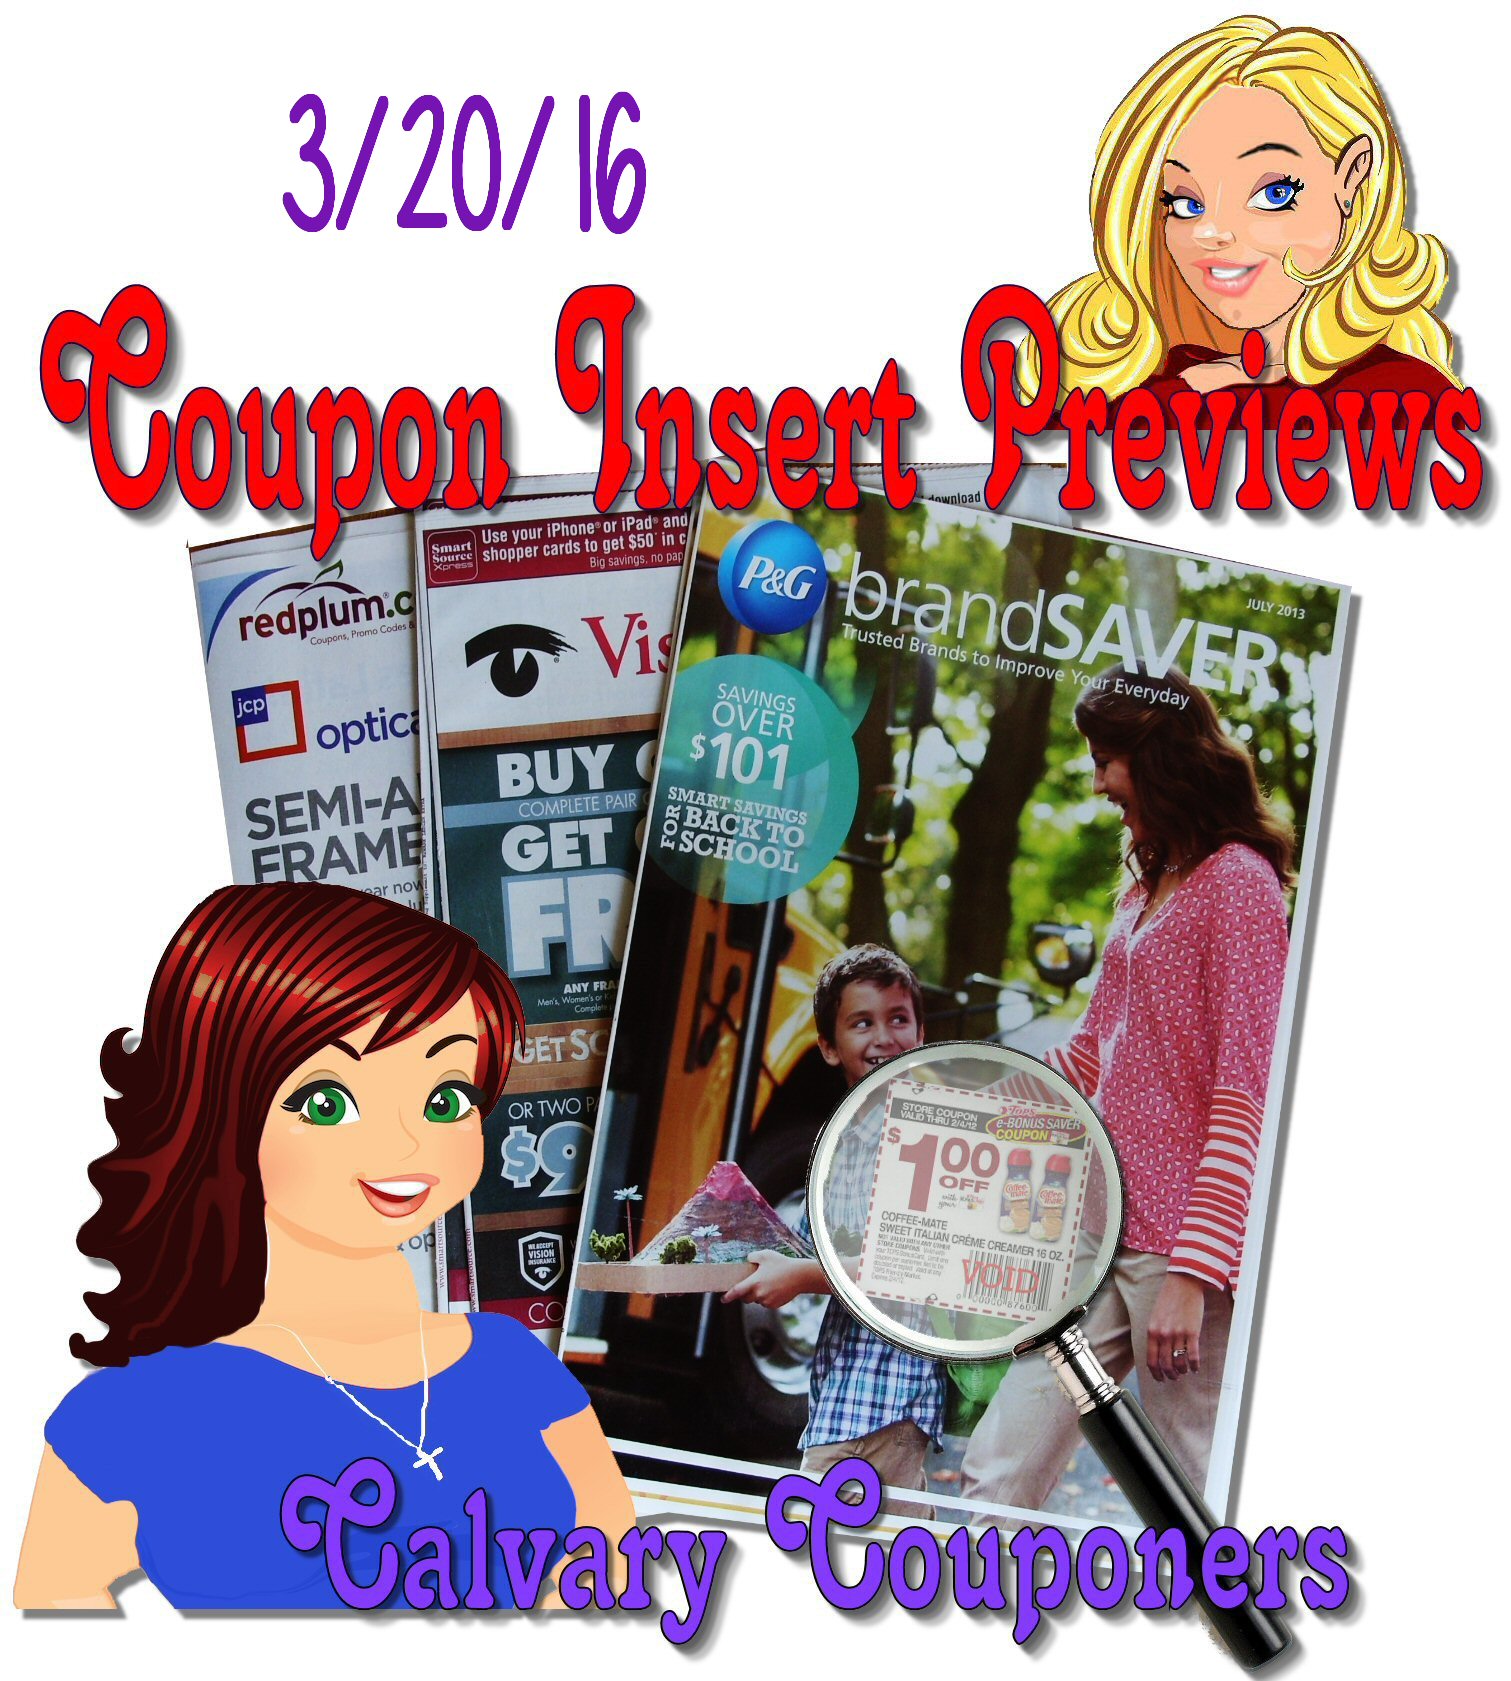 Sunday Coupon Insert Preview for 3-20-16 Calvary Couponers and Crafters